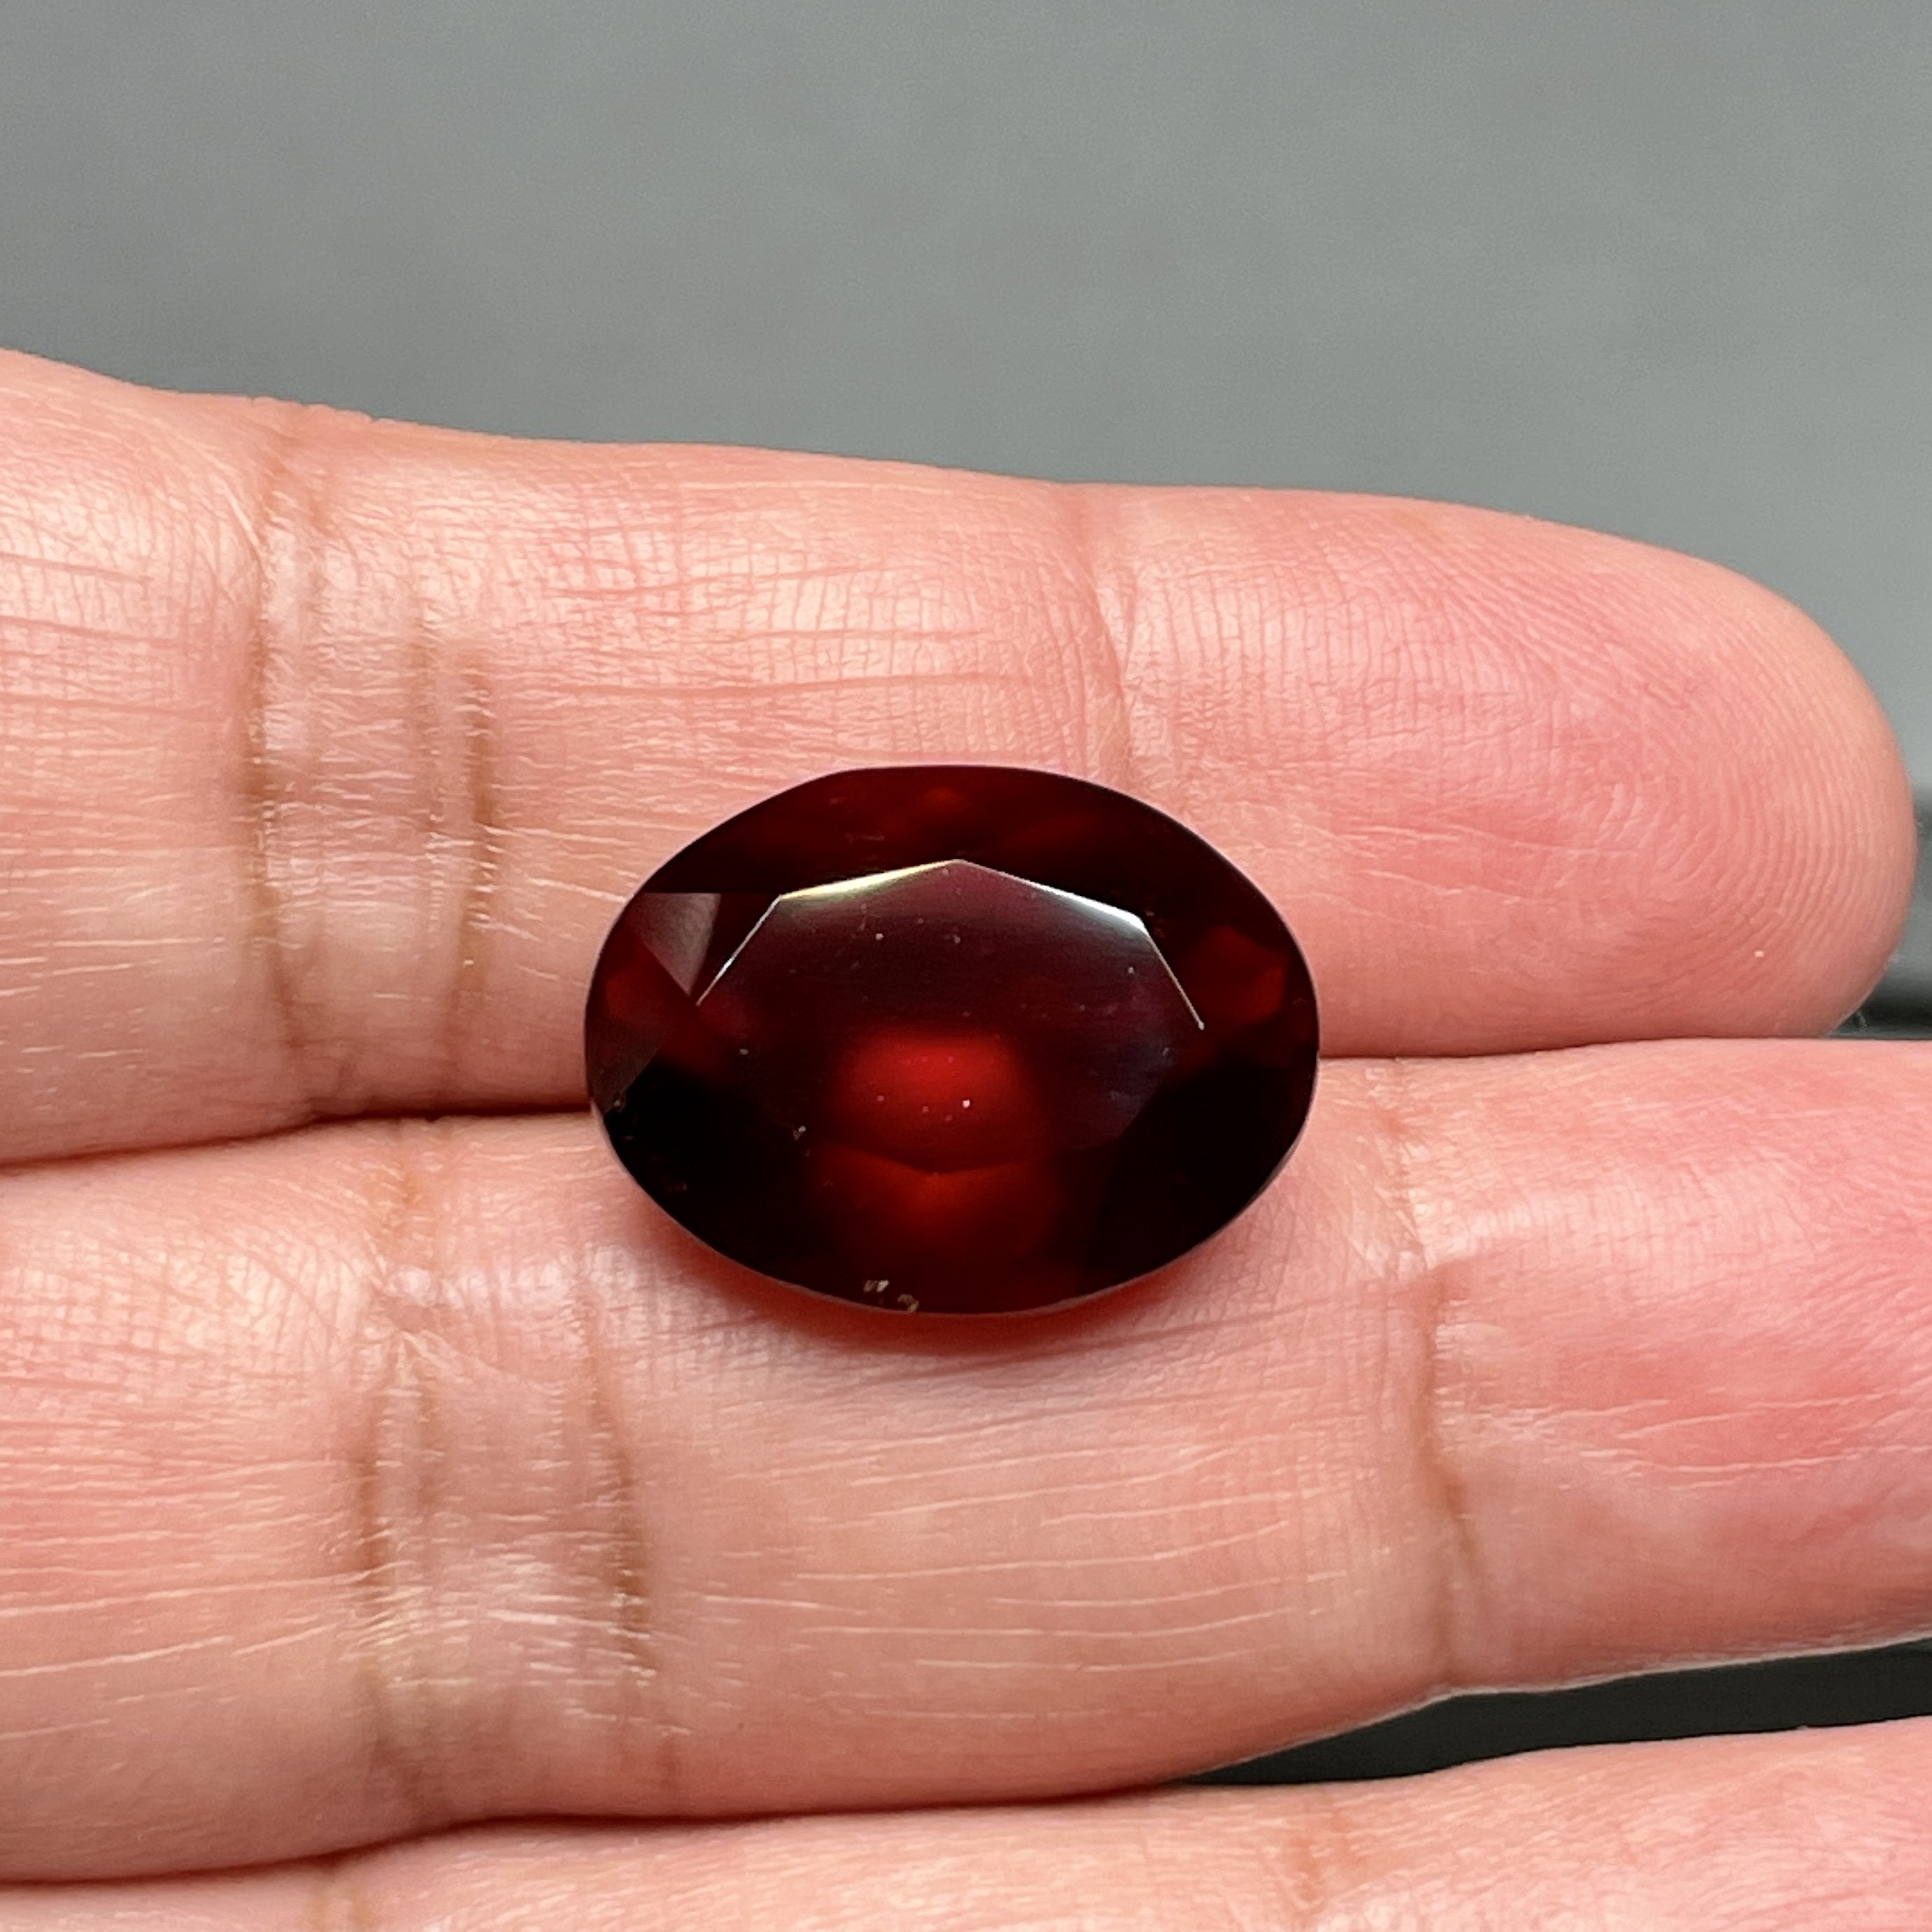 22.88Ct Hessonite Garnet Tanzania Untreated Unheated. 19 X 14 9.1 Mm. Use Either Side.